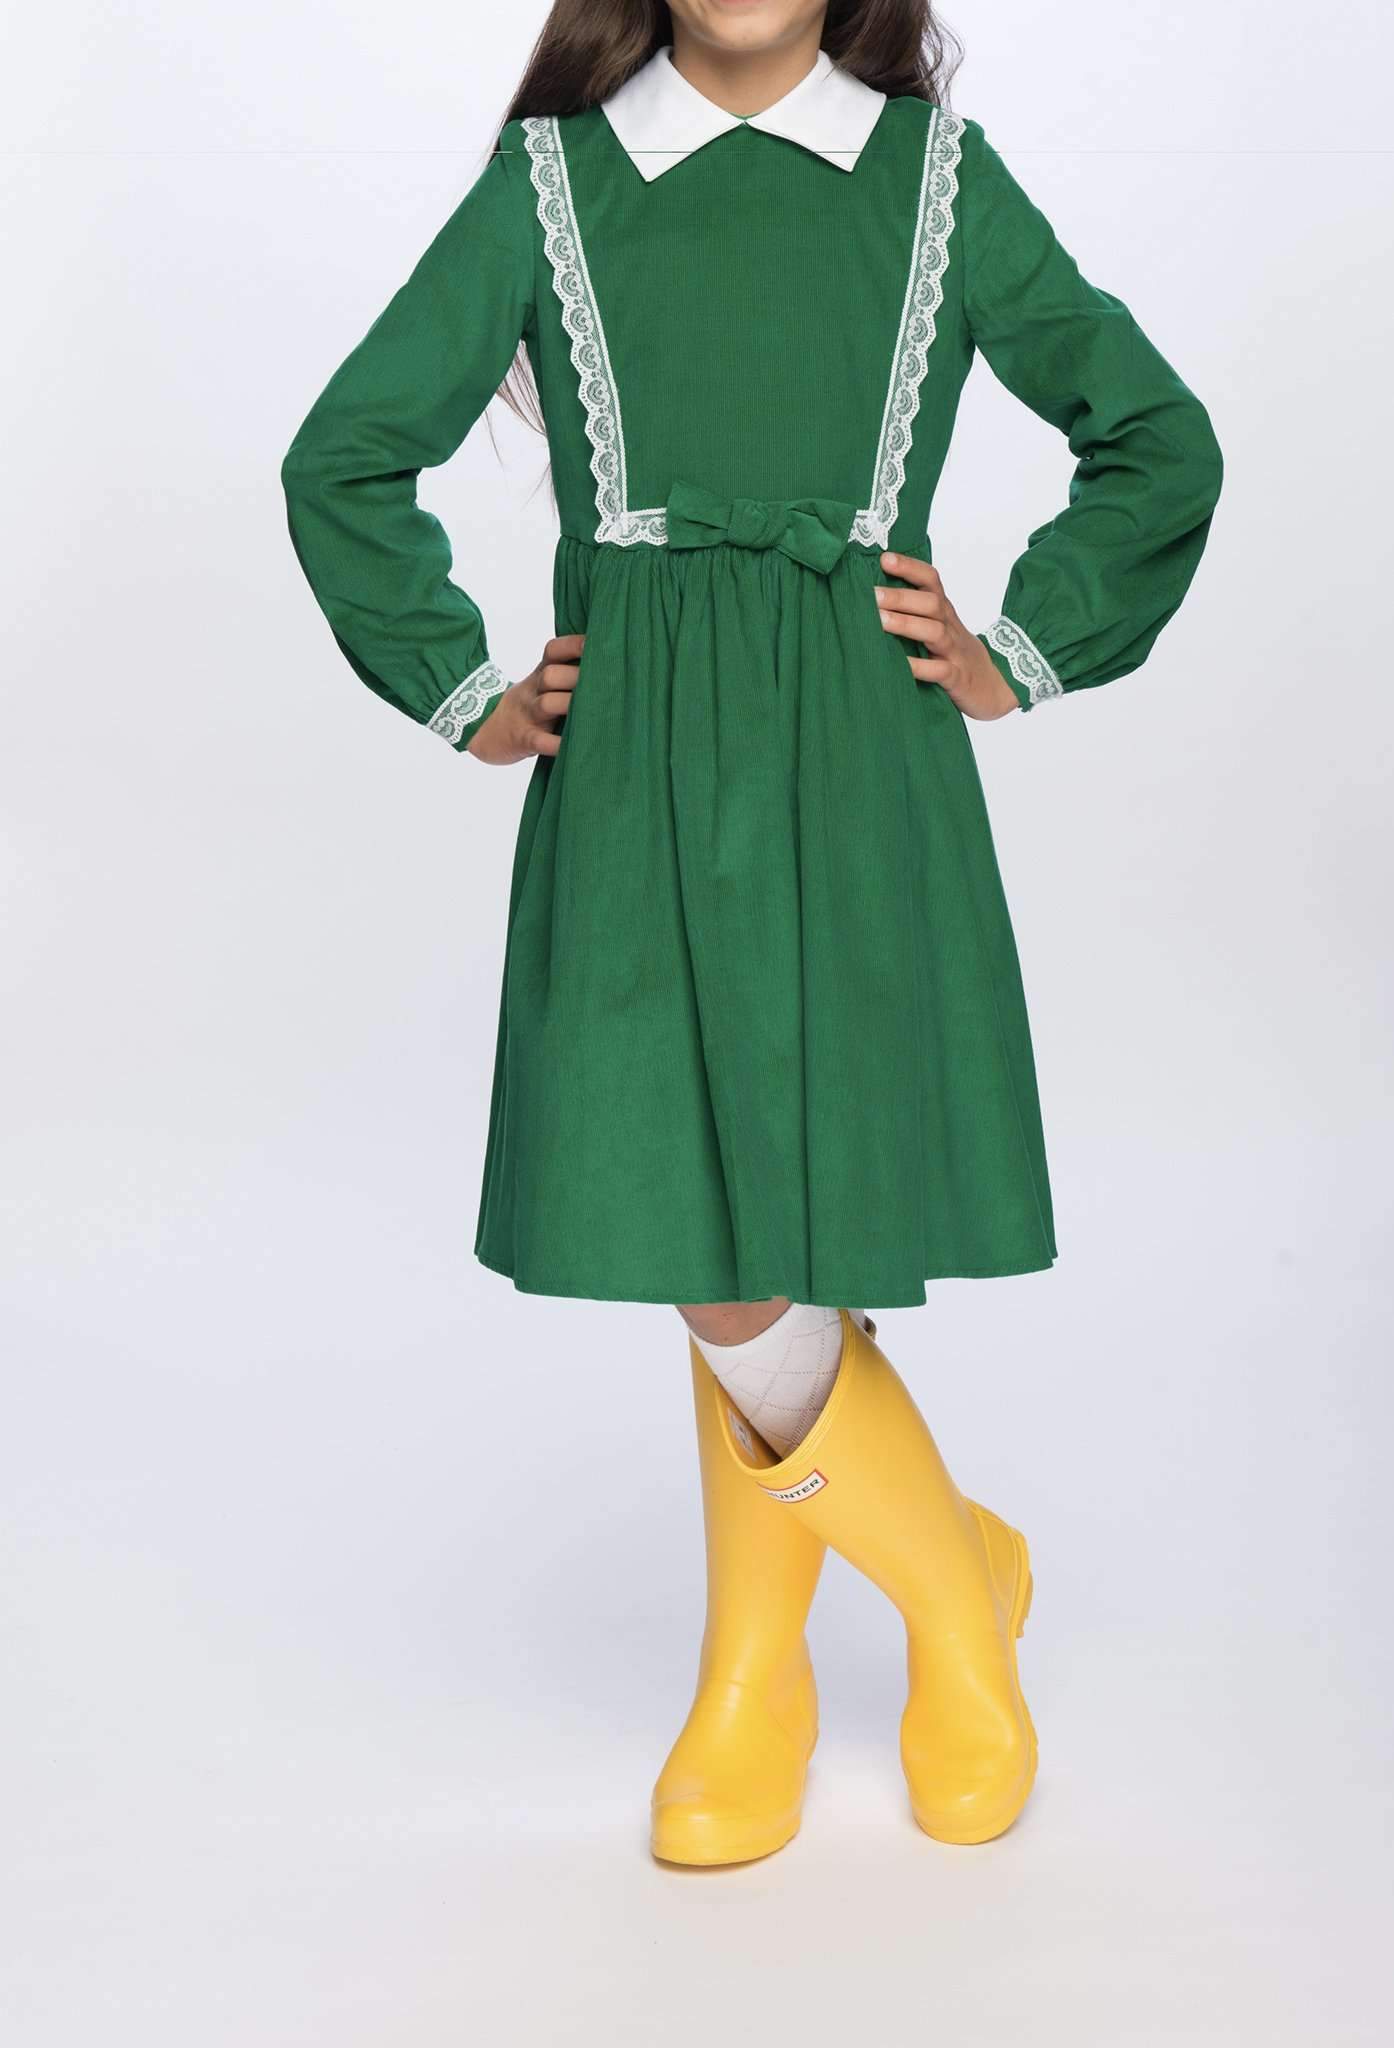 Girl modeling Payton Dress in Green with Yellow Boots